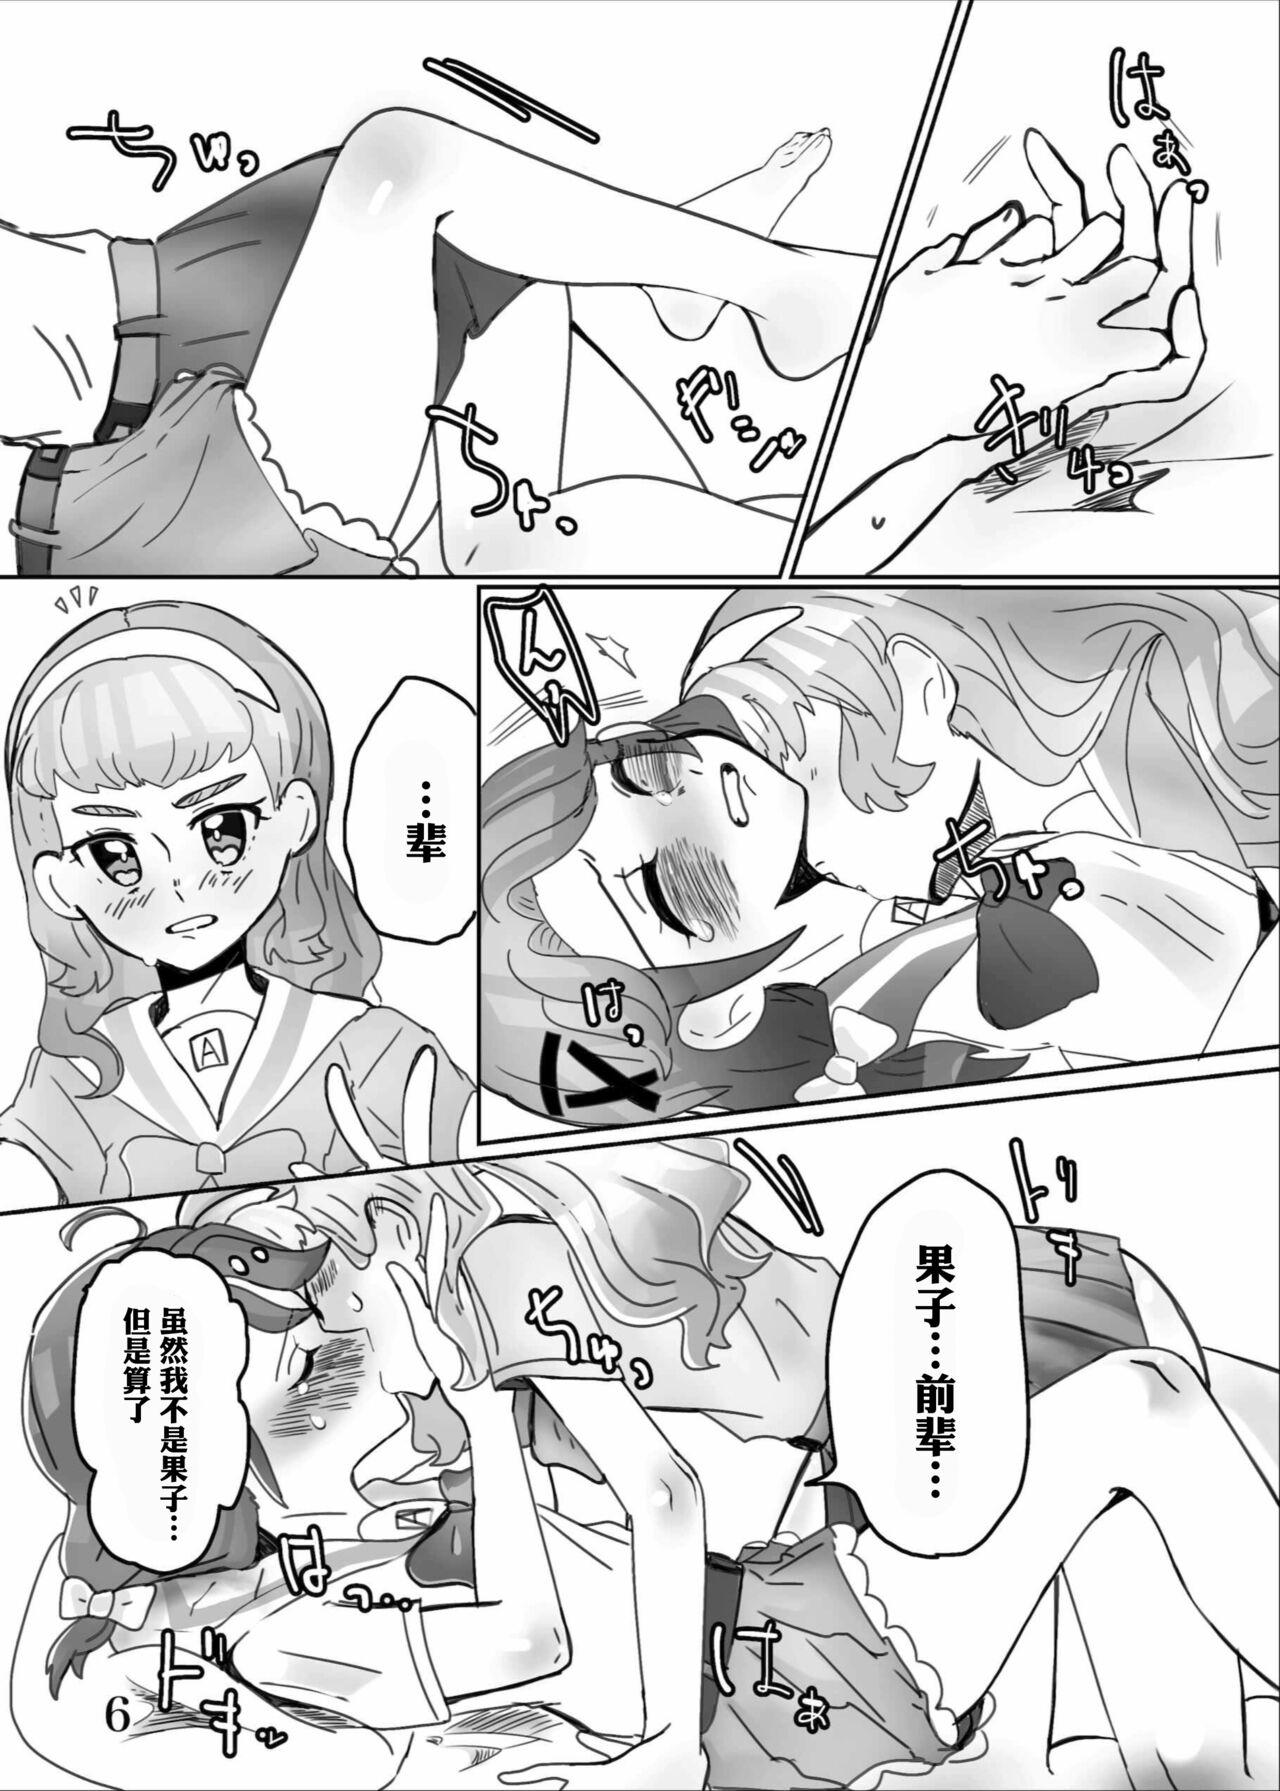 Van yaritaigotone do my best - Pretty cure Tropical rouge precure Cruising - Page 8